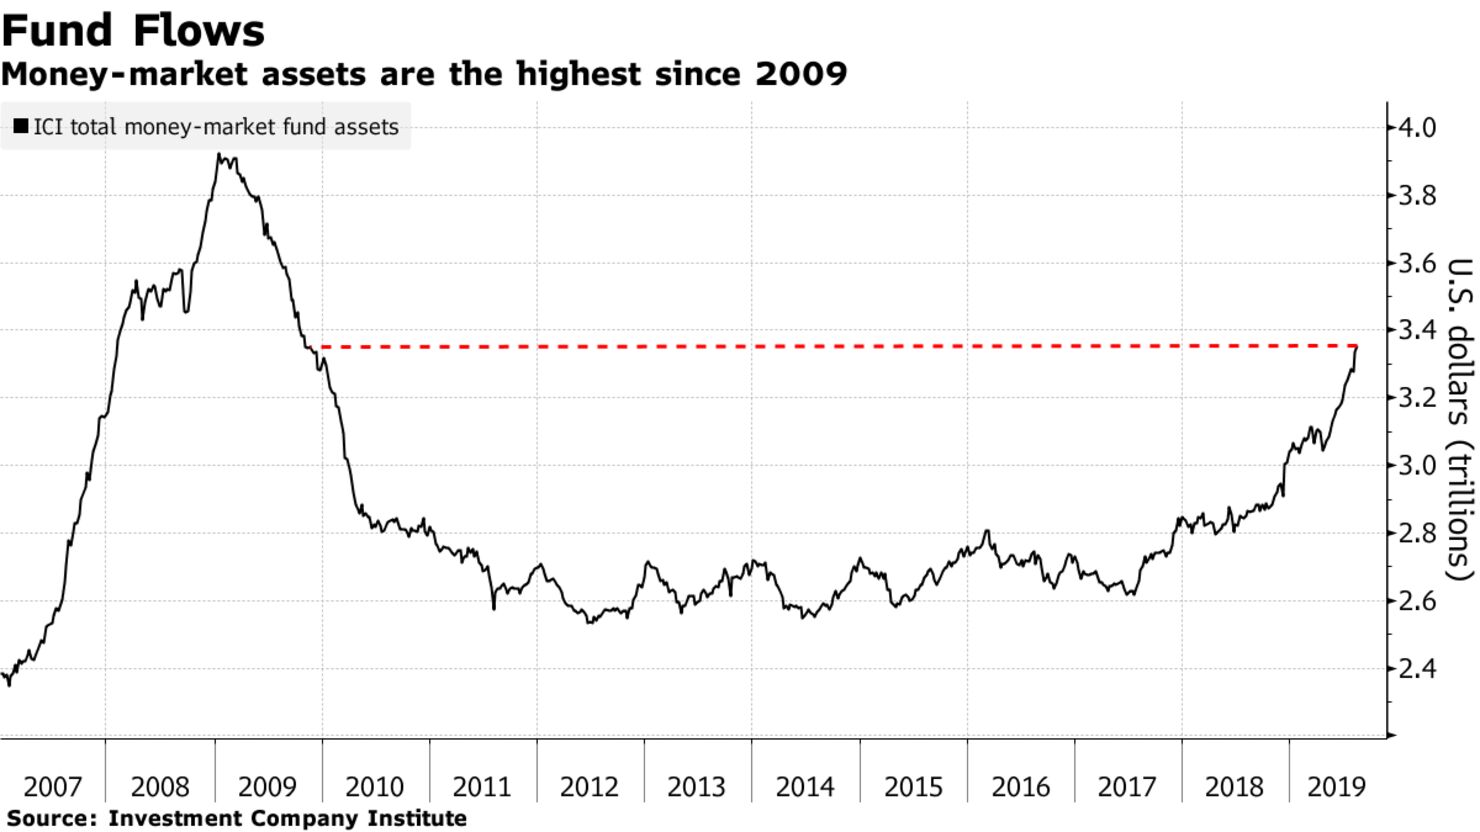 Money-market assets are the highest since 2009